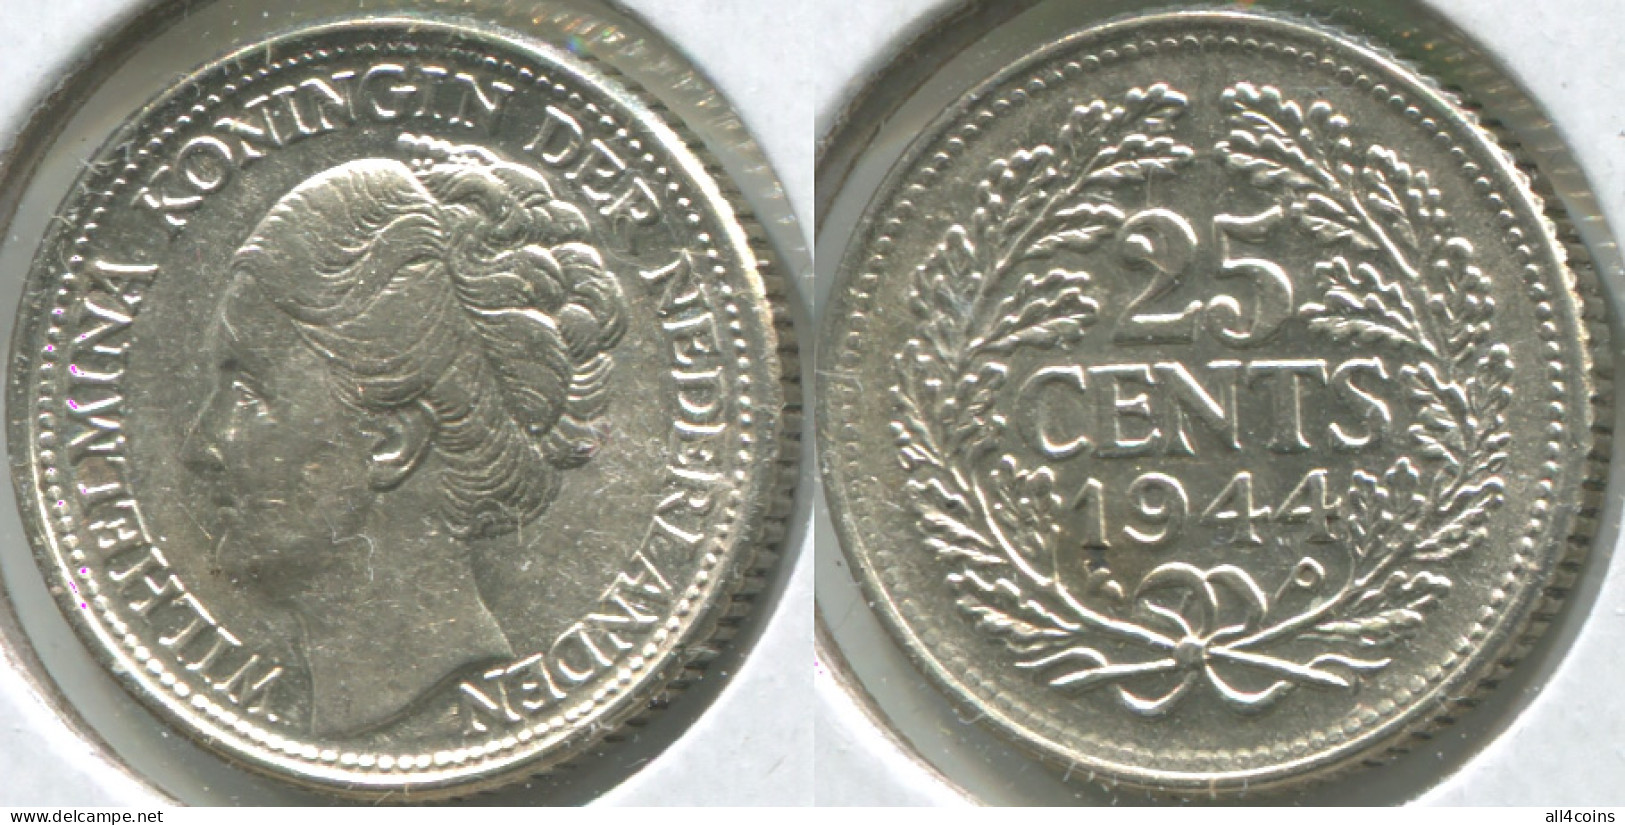 Netherlands. 25 Cents. 1944.P (Silver. Coin KM#164. XF /Unc) - 25 Centavos